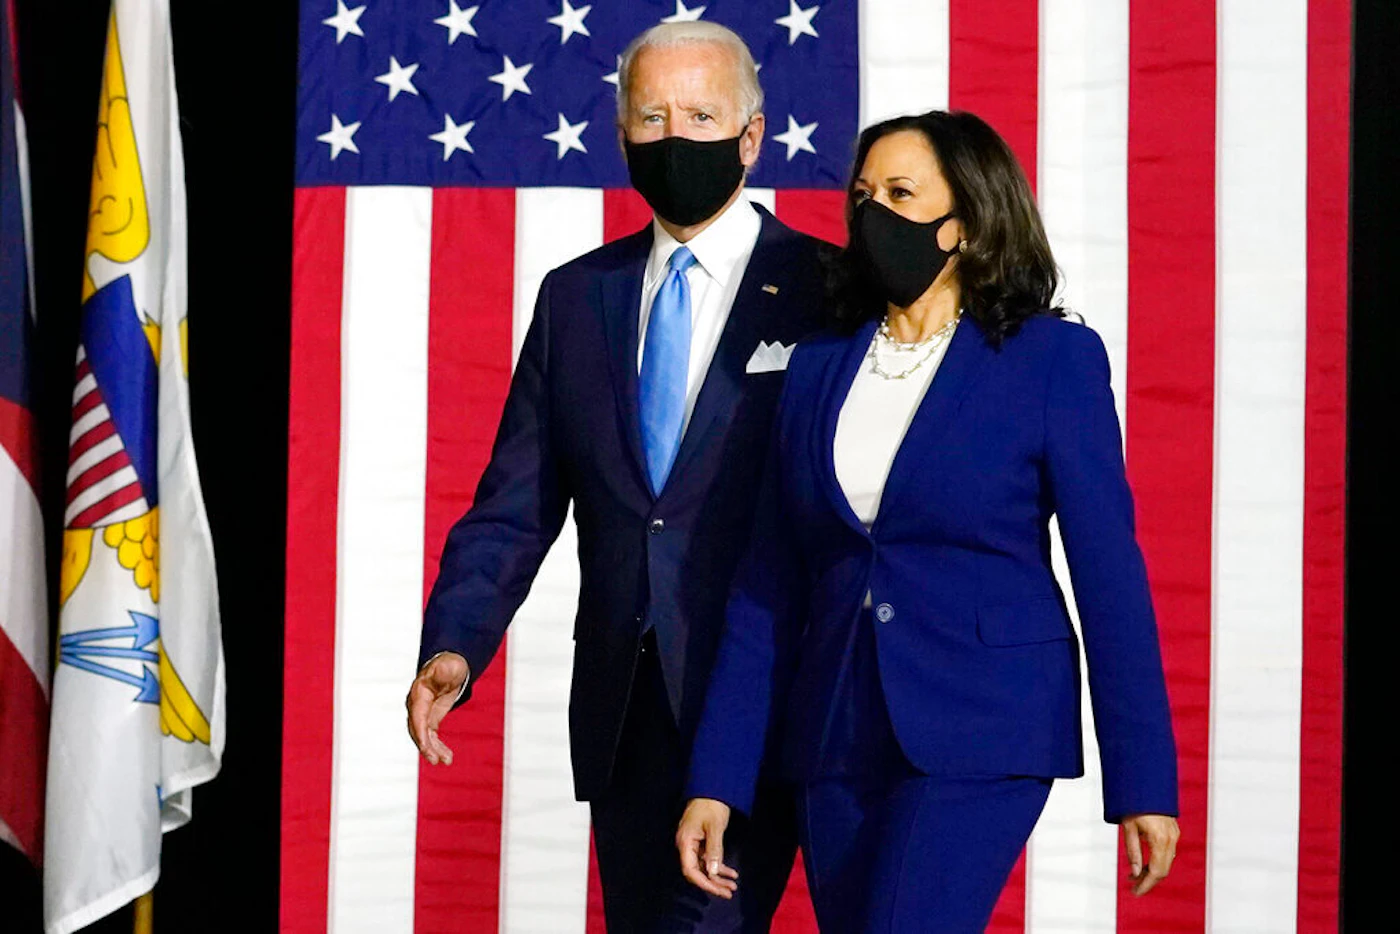 Semocratic presidential candidate former Vice President Joe Biden and his running mate Sen. Kamala Harris, D-Calif., arrive to speak at a news conference at Alexis Dupont High School in Wilmington, Del. (AP Photo/Carolyn Kaster)